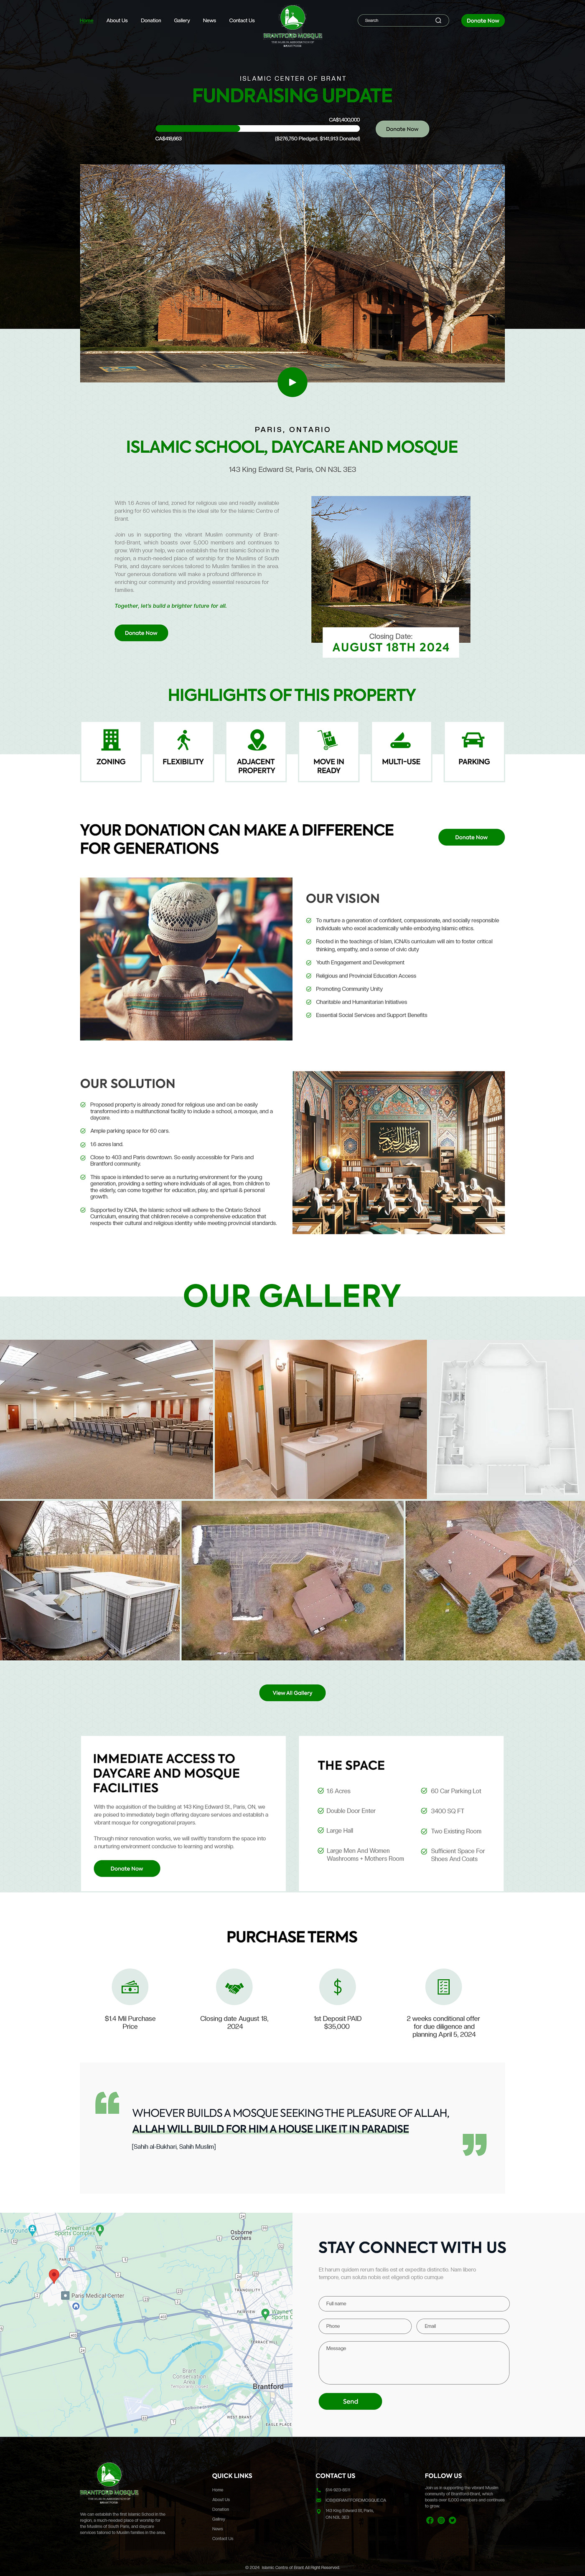 donation funding mosque islamic school UI/UX Website landing page daycare property